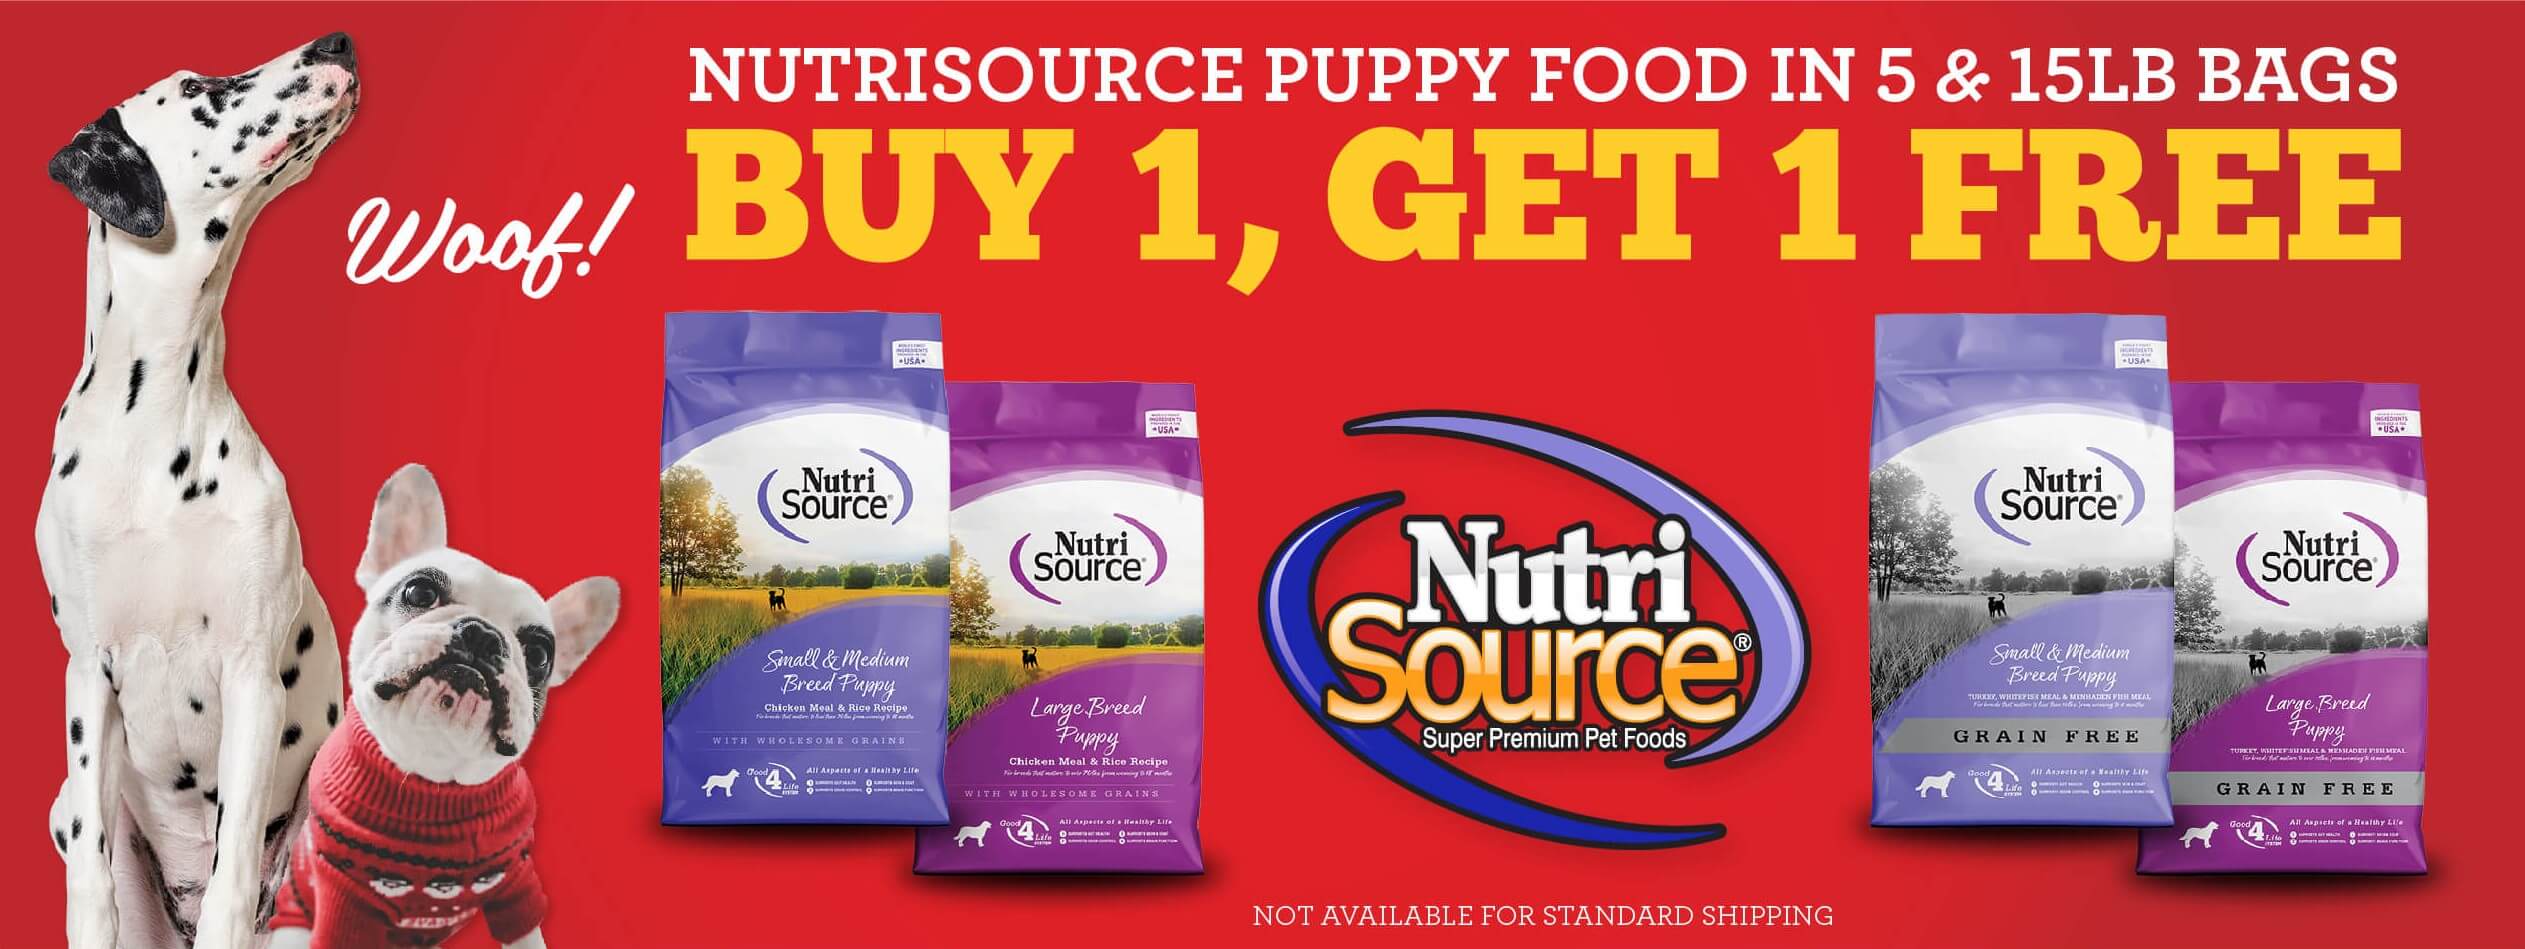 Happy Holidays - Nutrisource Puppy Food In 5 and 15lb Bags Buy 1, Get 1 Free